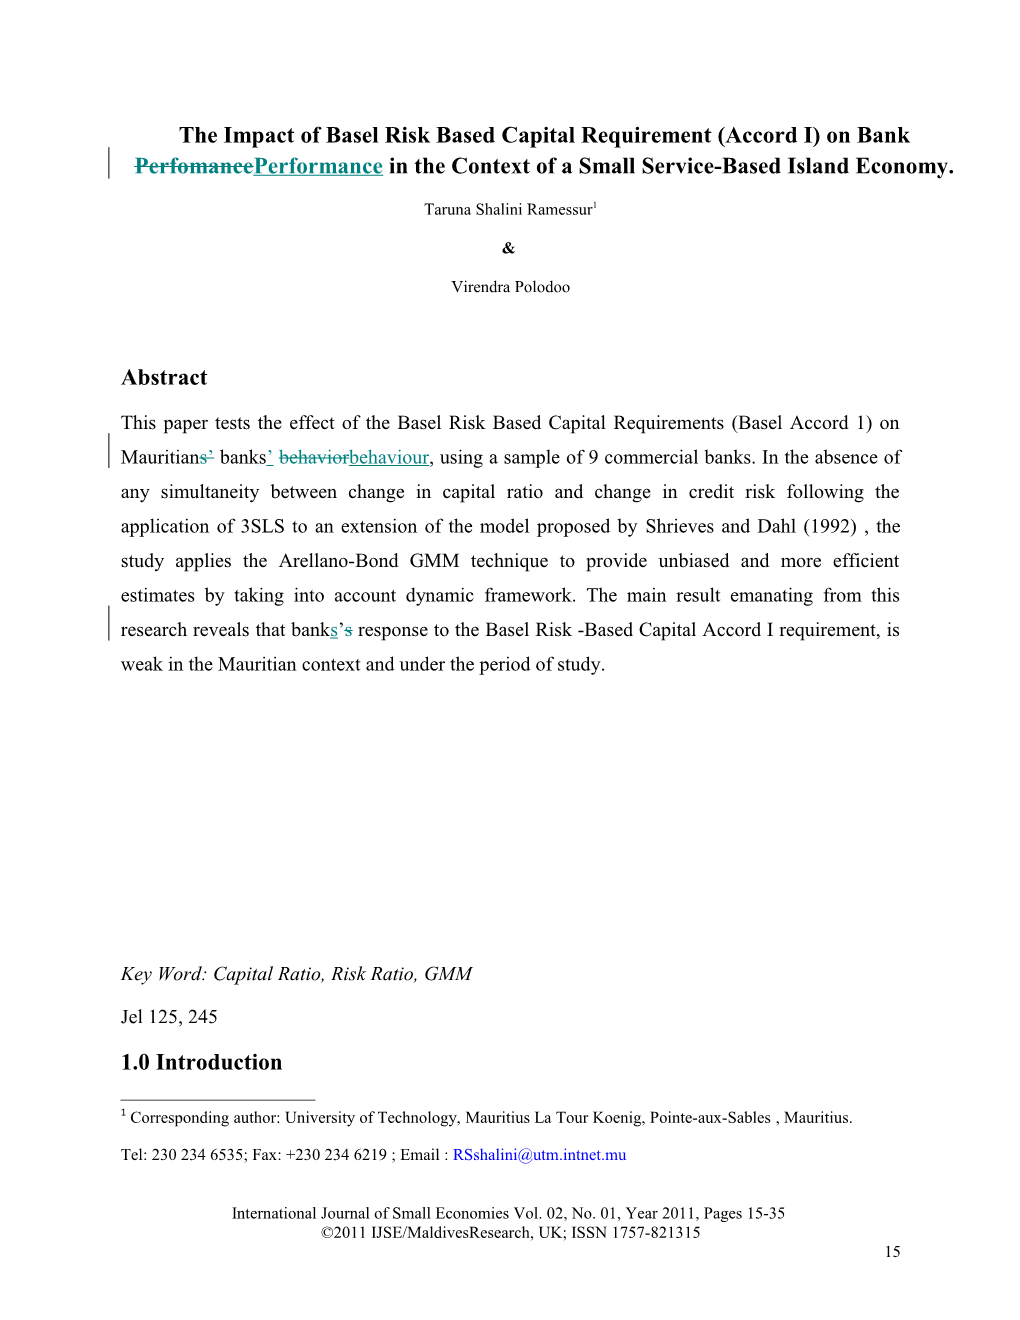 The Impact of Basel Risk Based Capital Requirement (Accord I) on Bank Perfomanceperformance